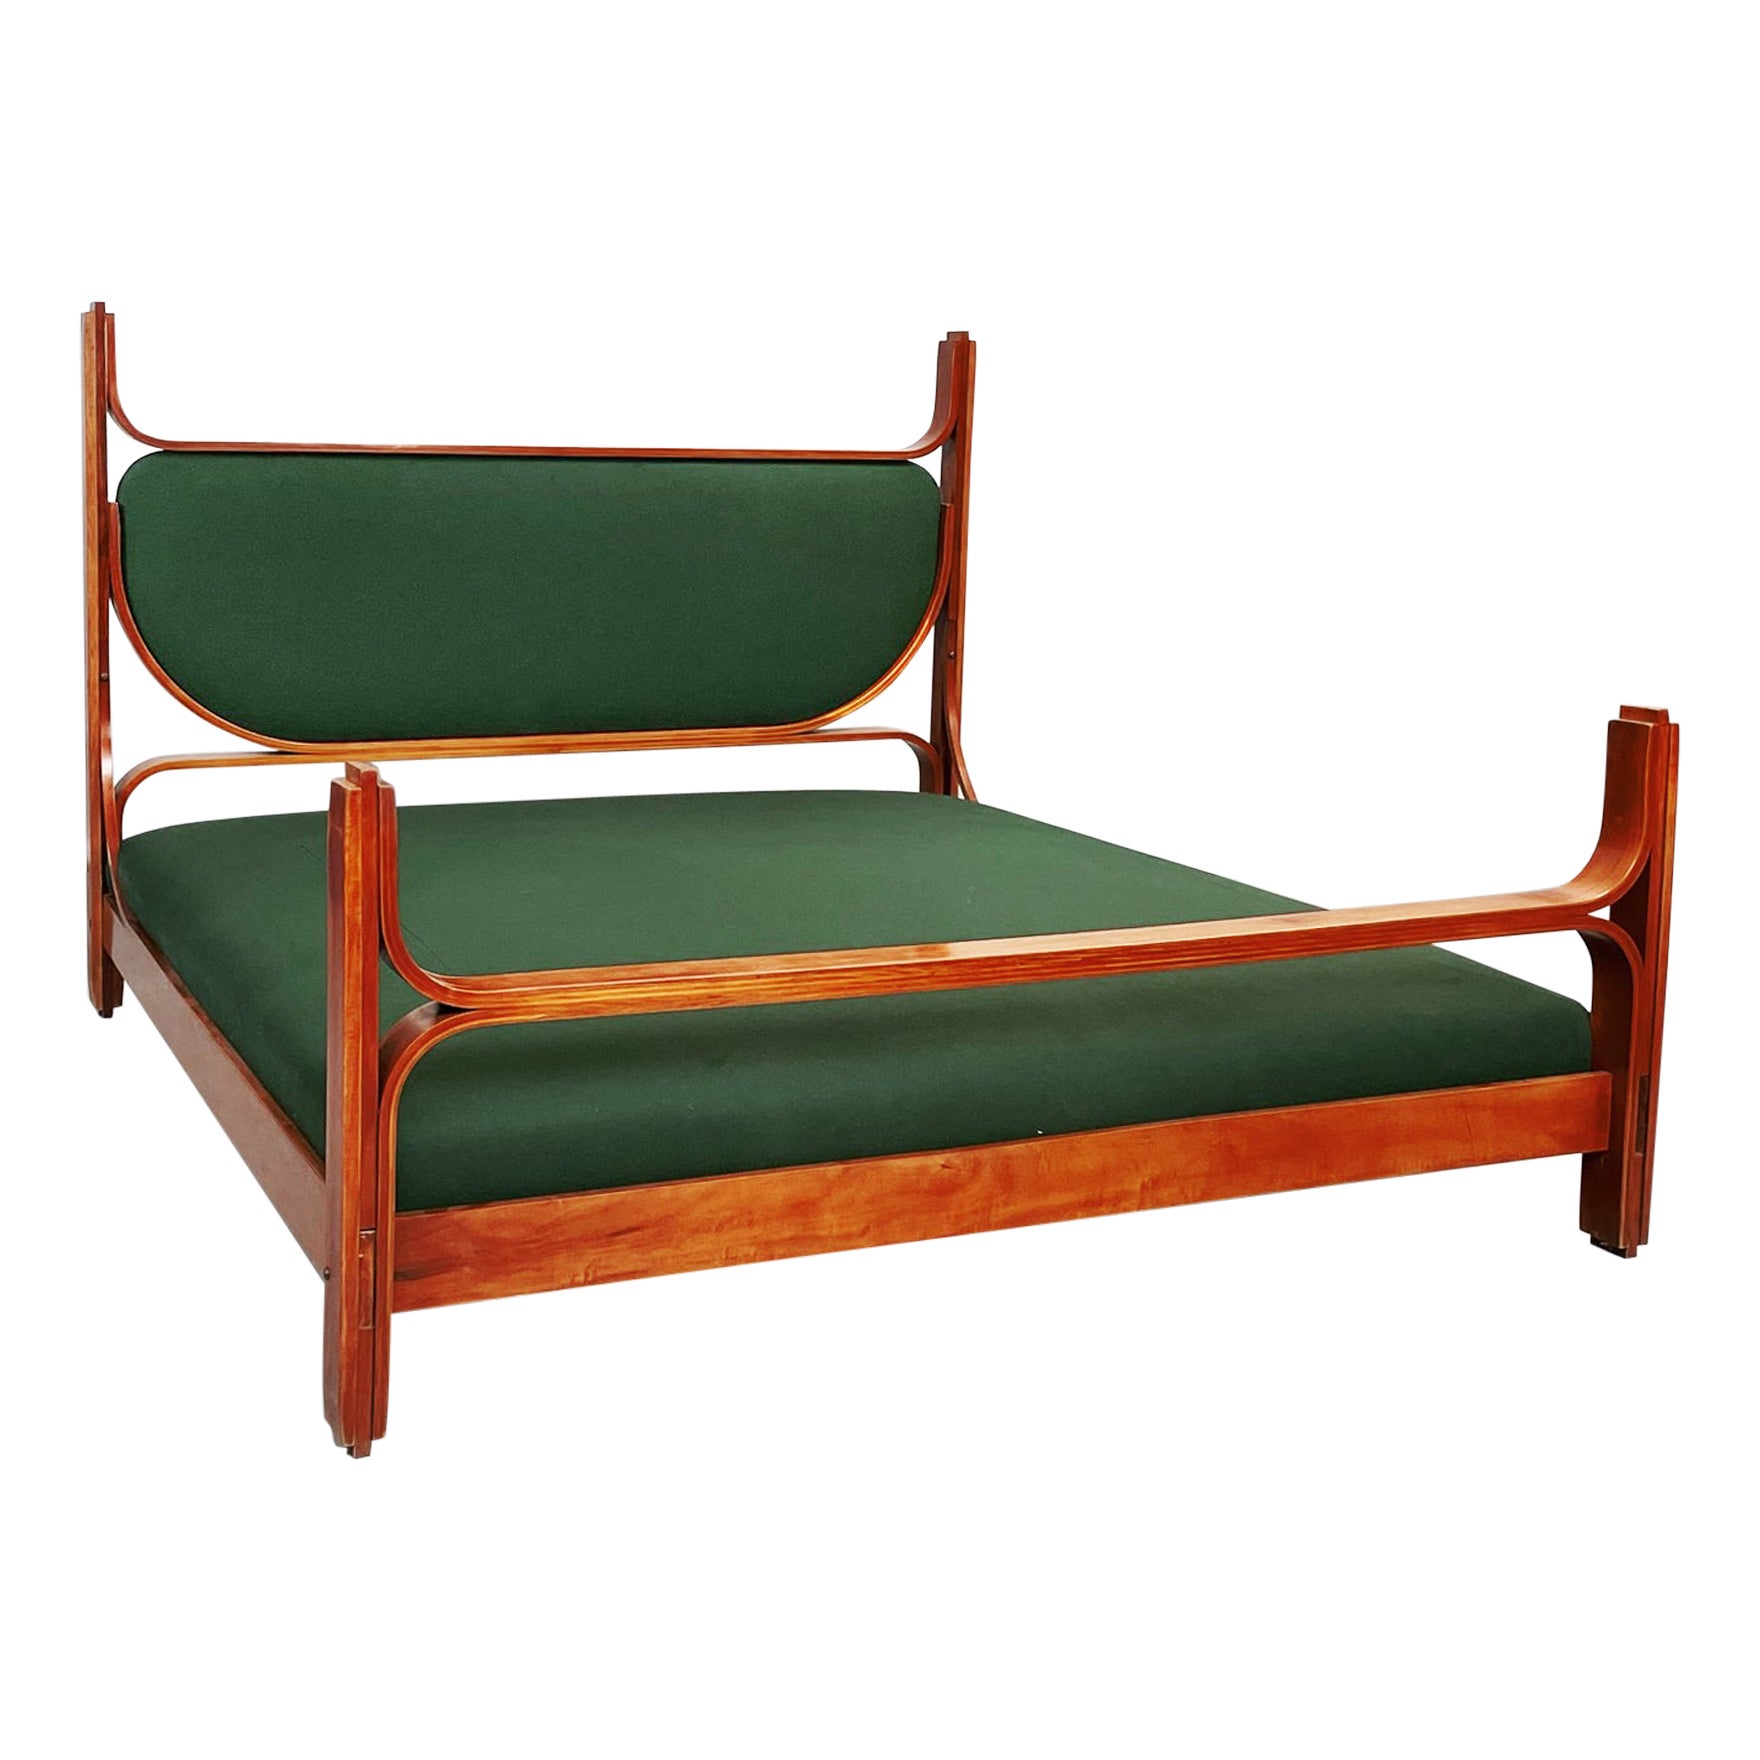 Italian midcentury Wooden and green fabric double bed L12 by Fulvio Raboni, 1959 For Sale